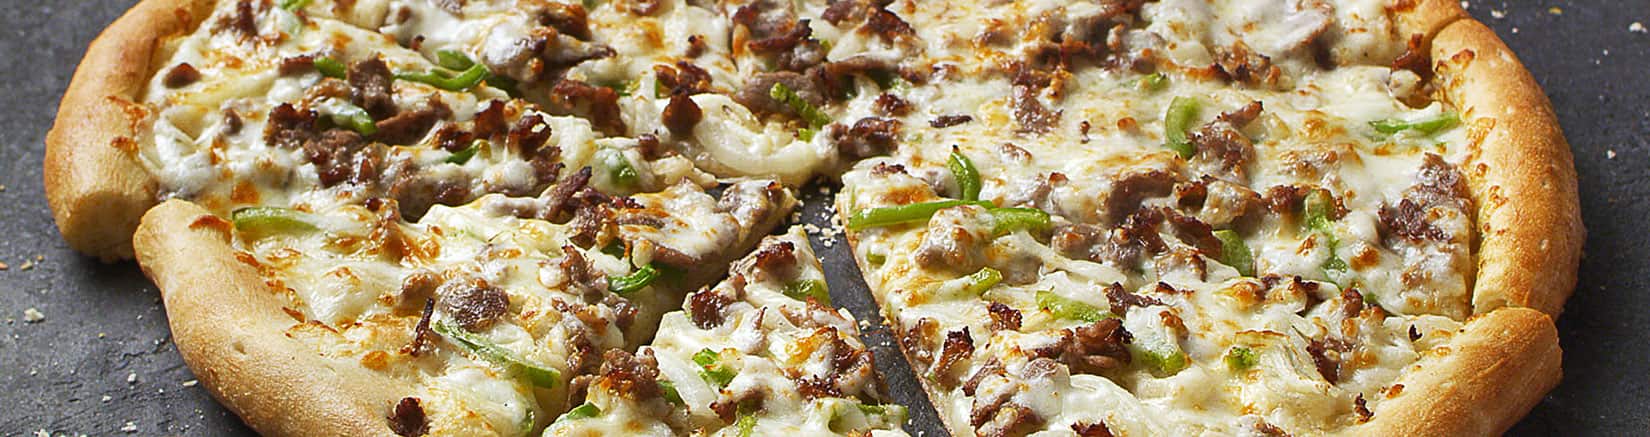 Philly Cheesesteak Pizza Delivery Near Me - Best Philly ...